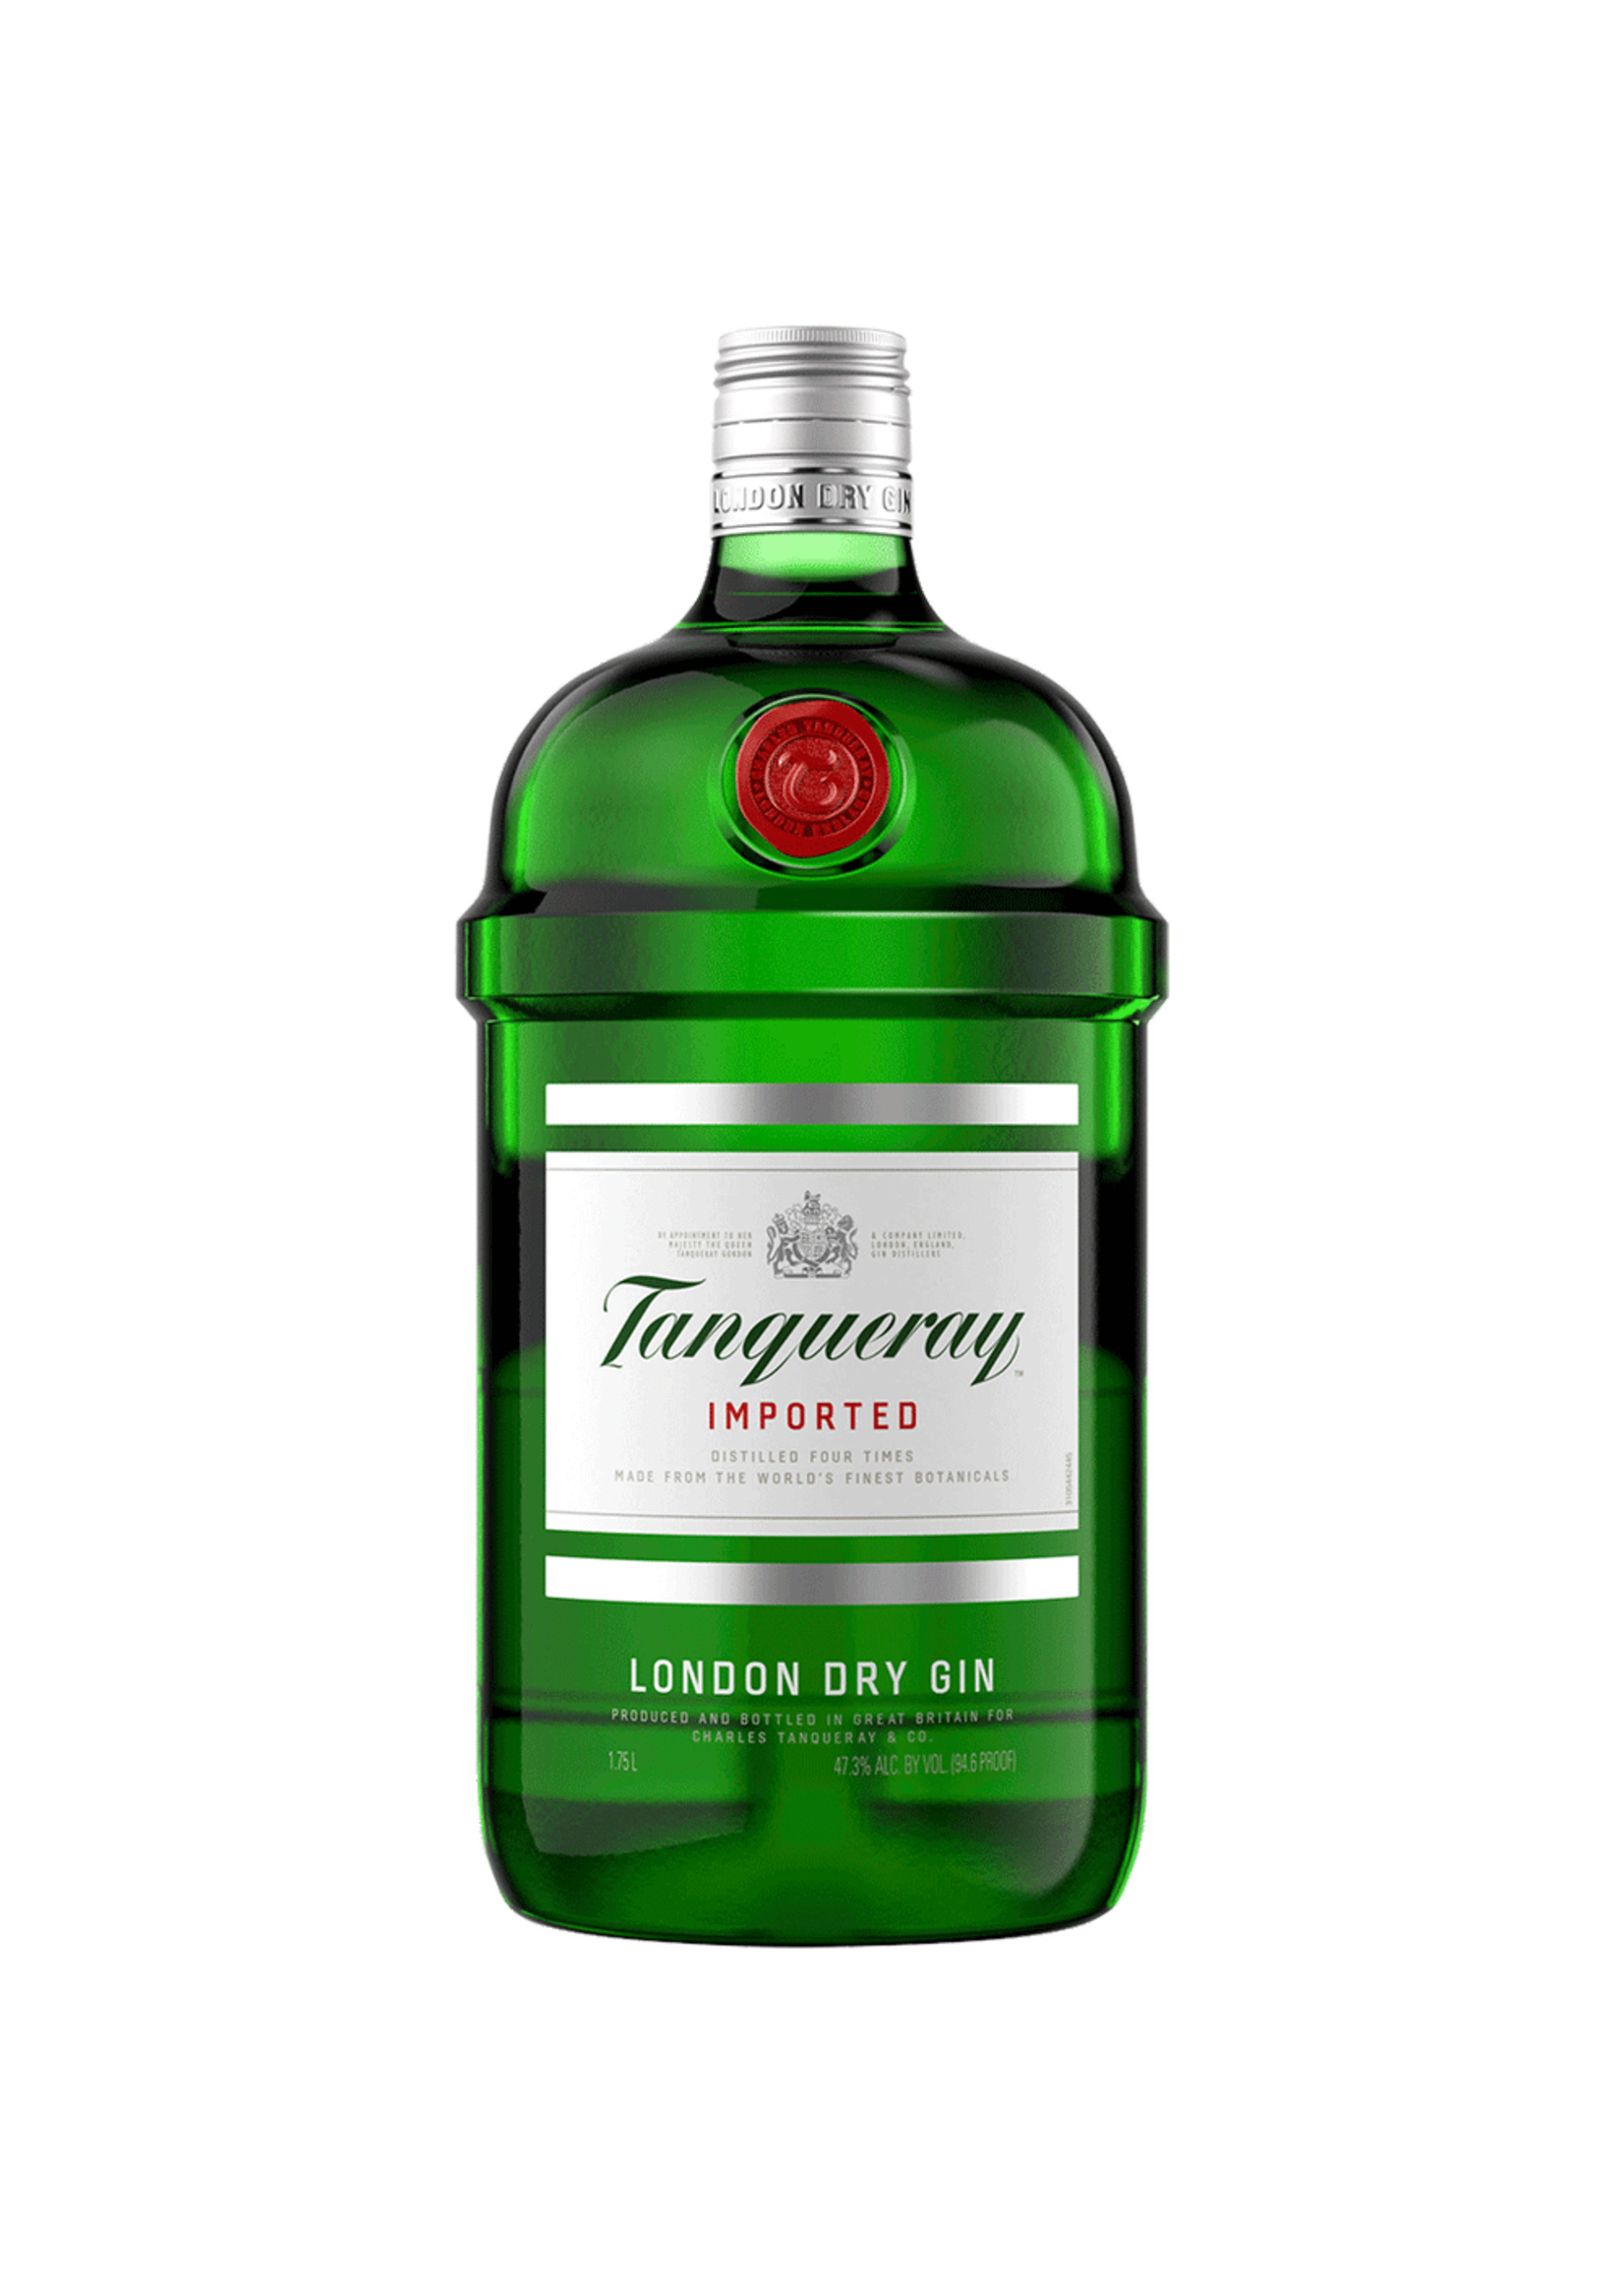 Tanqueray London Dry Gin 94.6Proof 1.75 Ltr